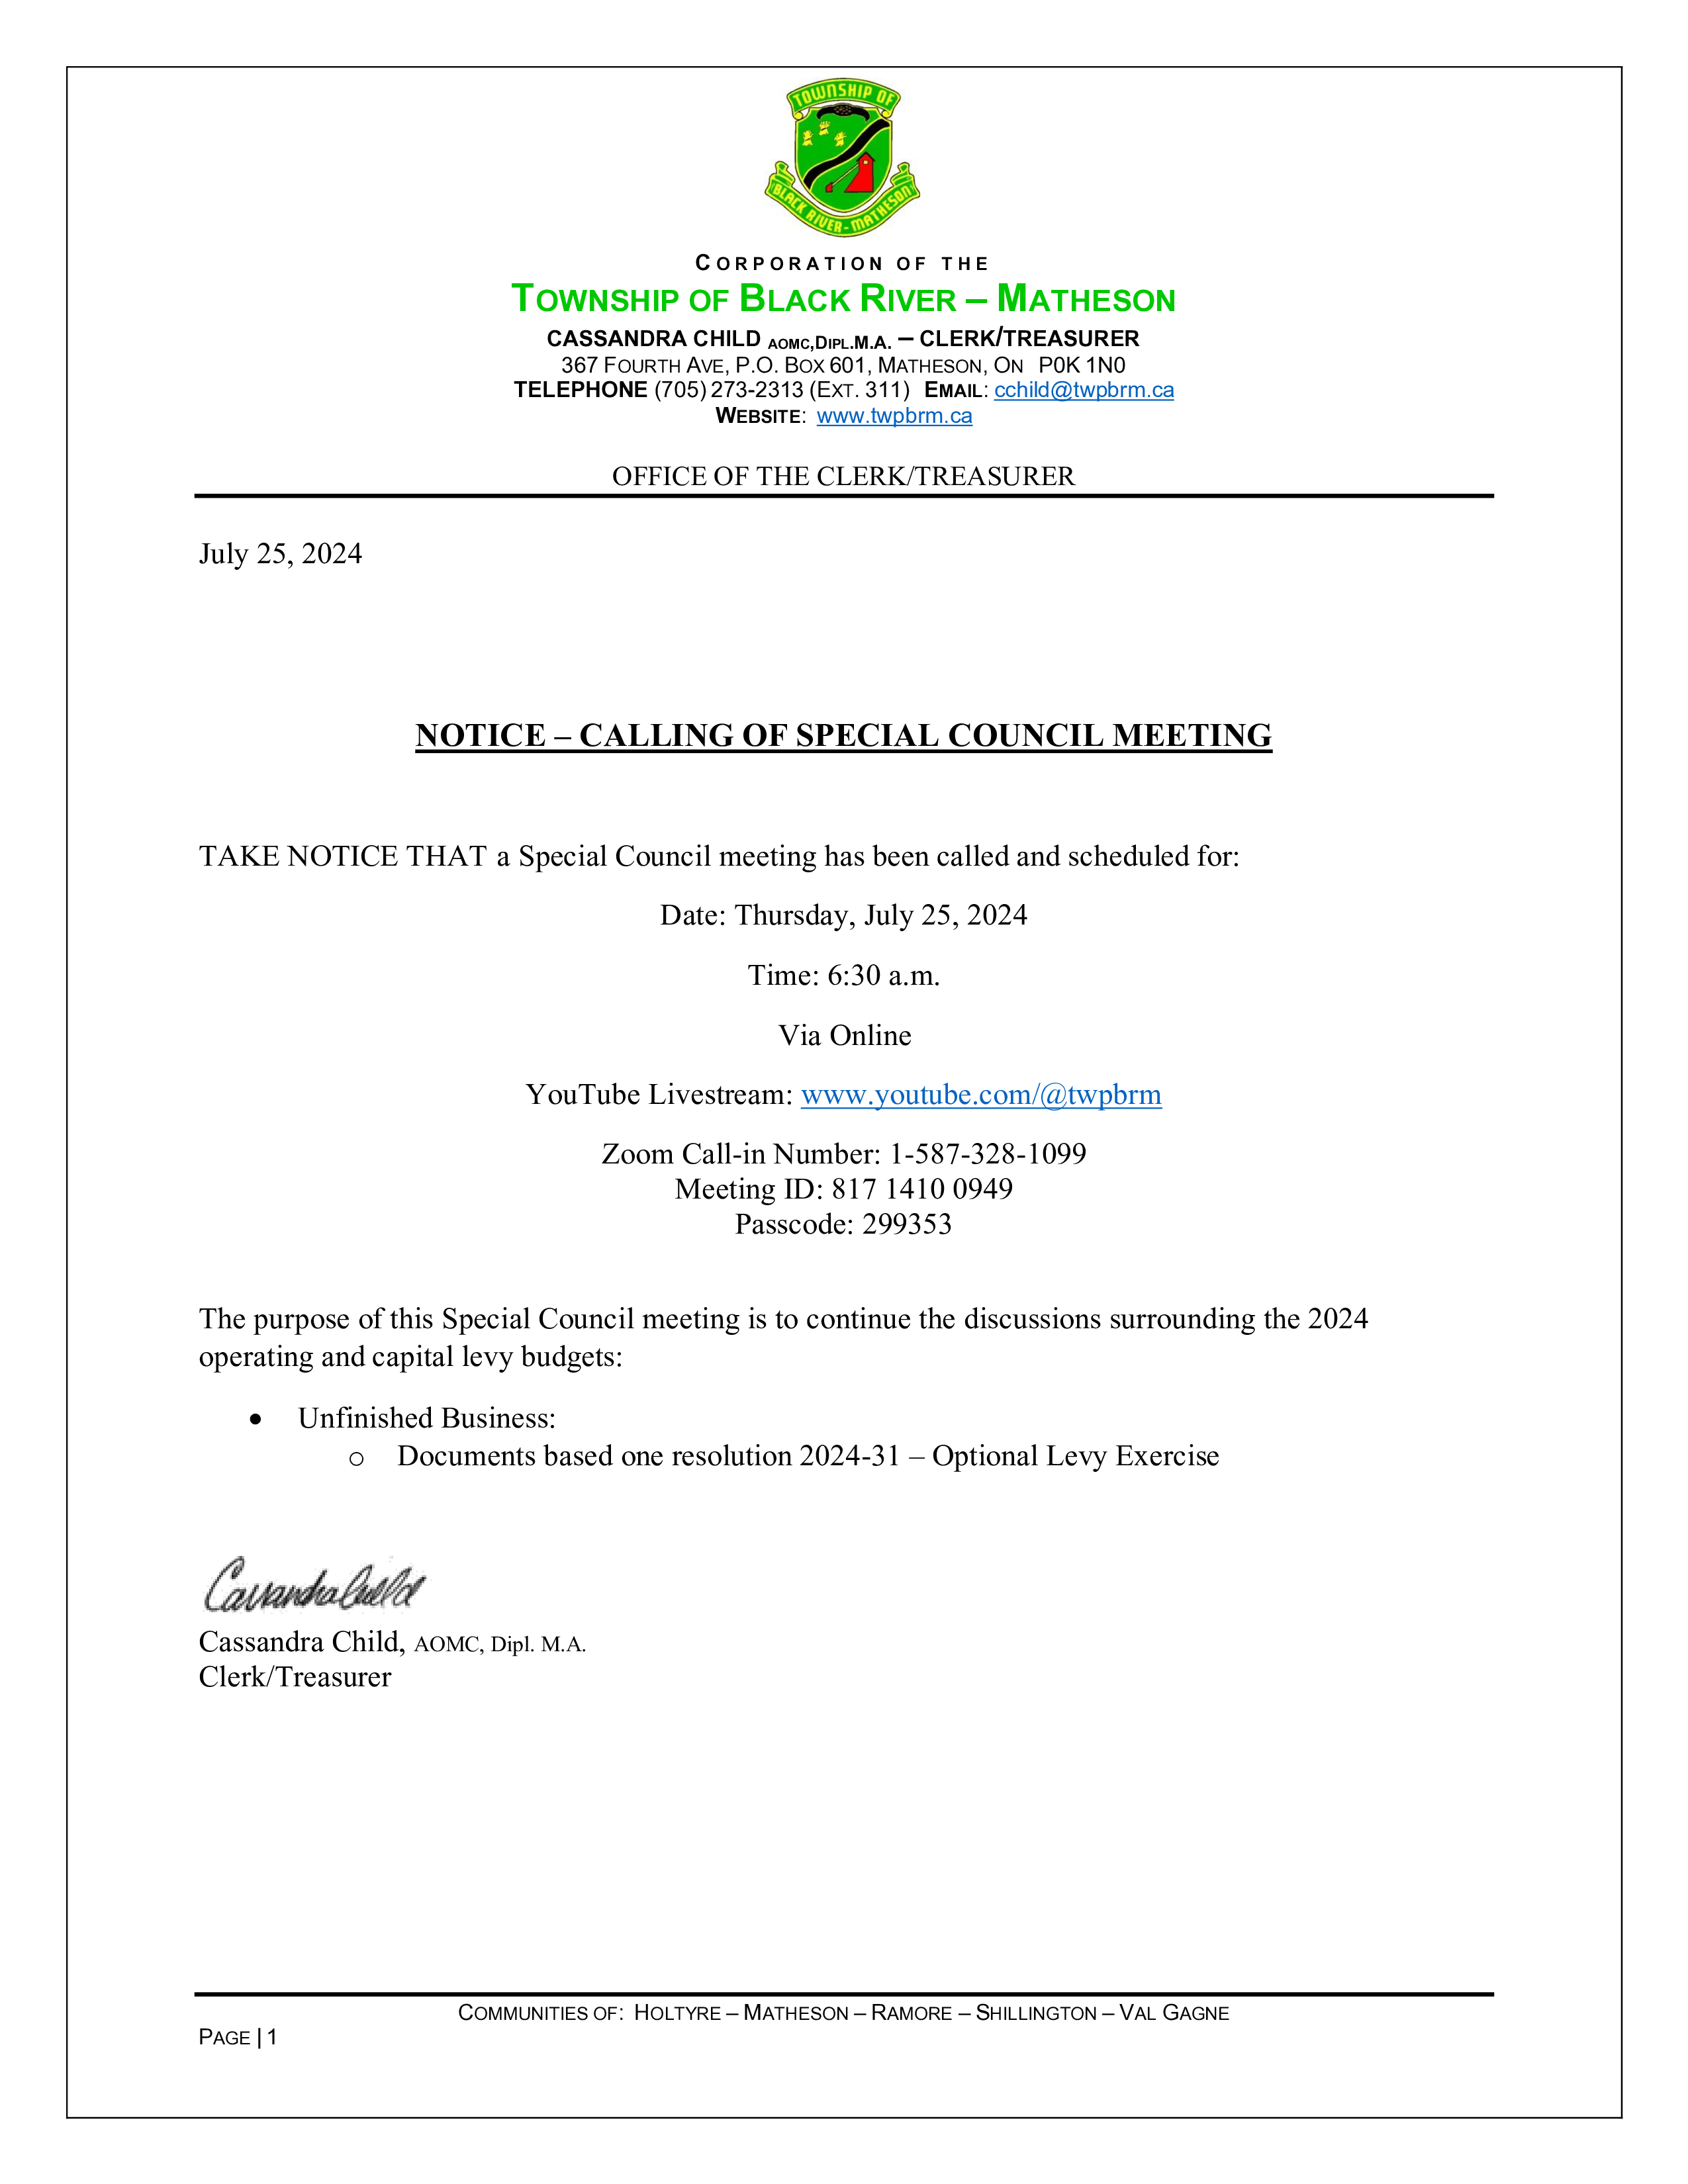 Image of Notice of Special Council Meeting - July 25, 2024